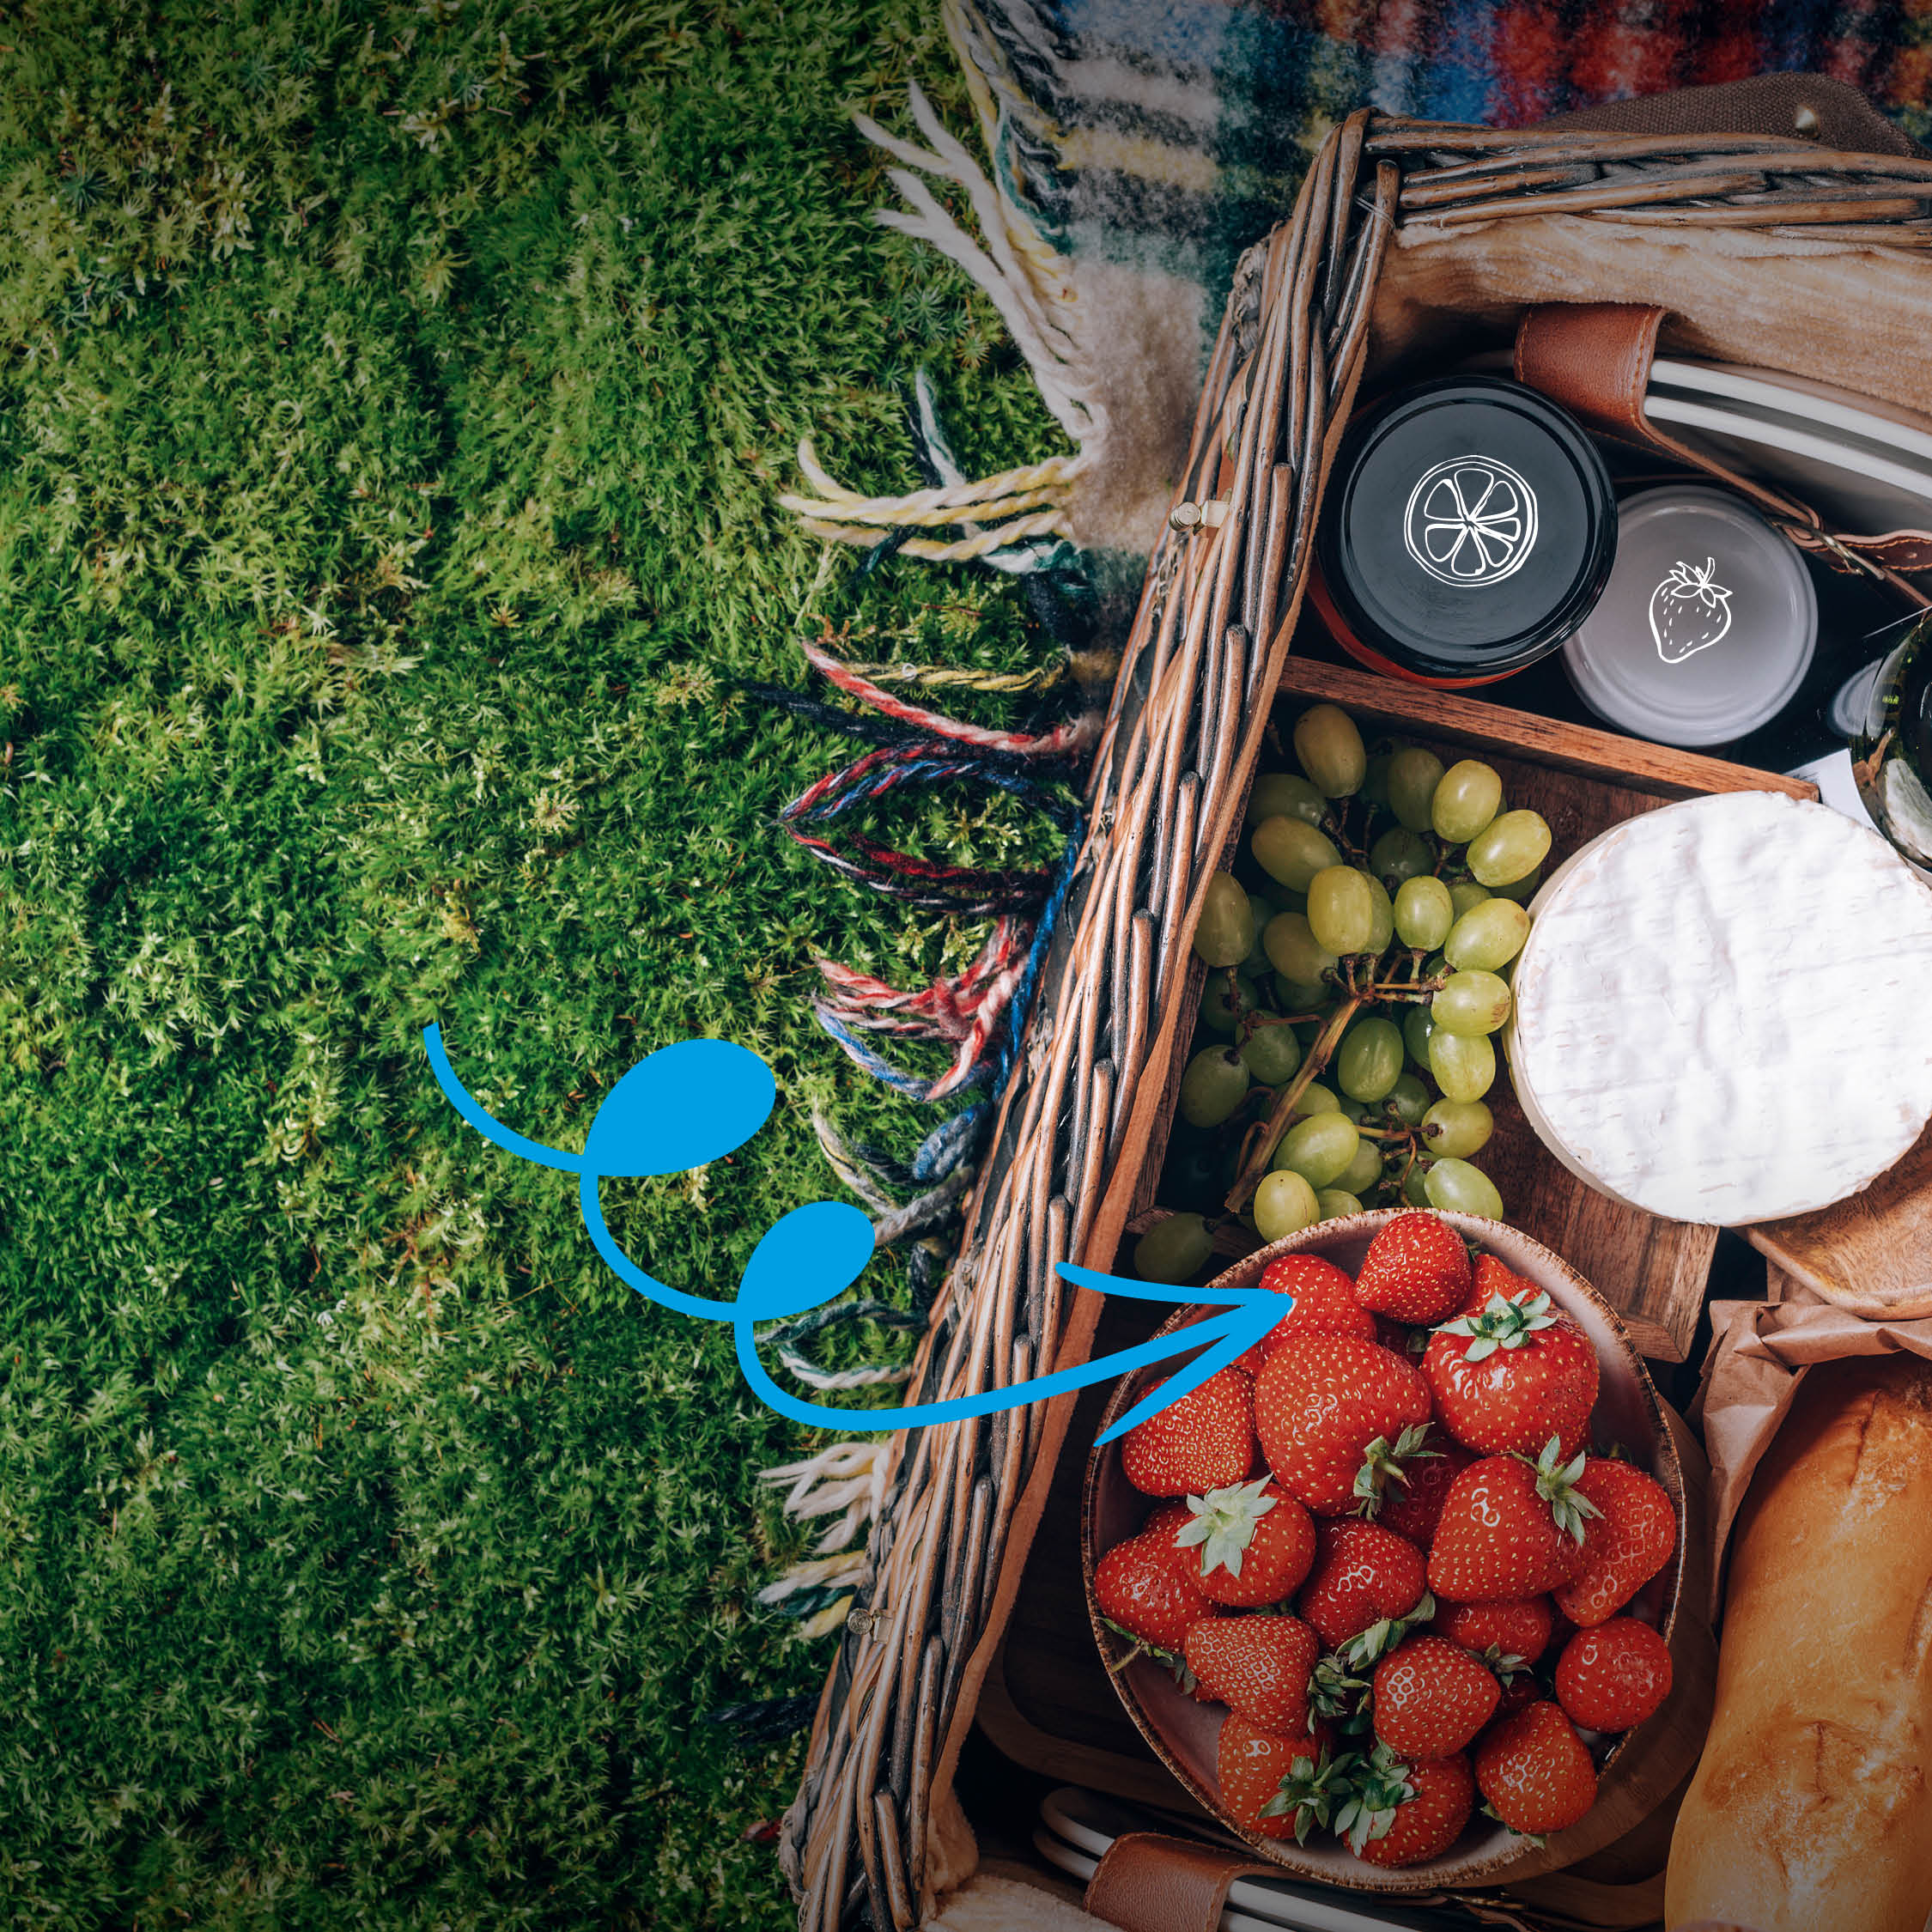 Savvy picnic ideas from our #SavvyWorkingMum